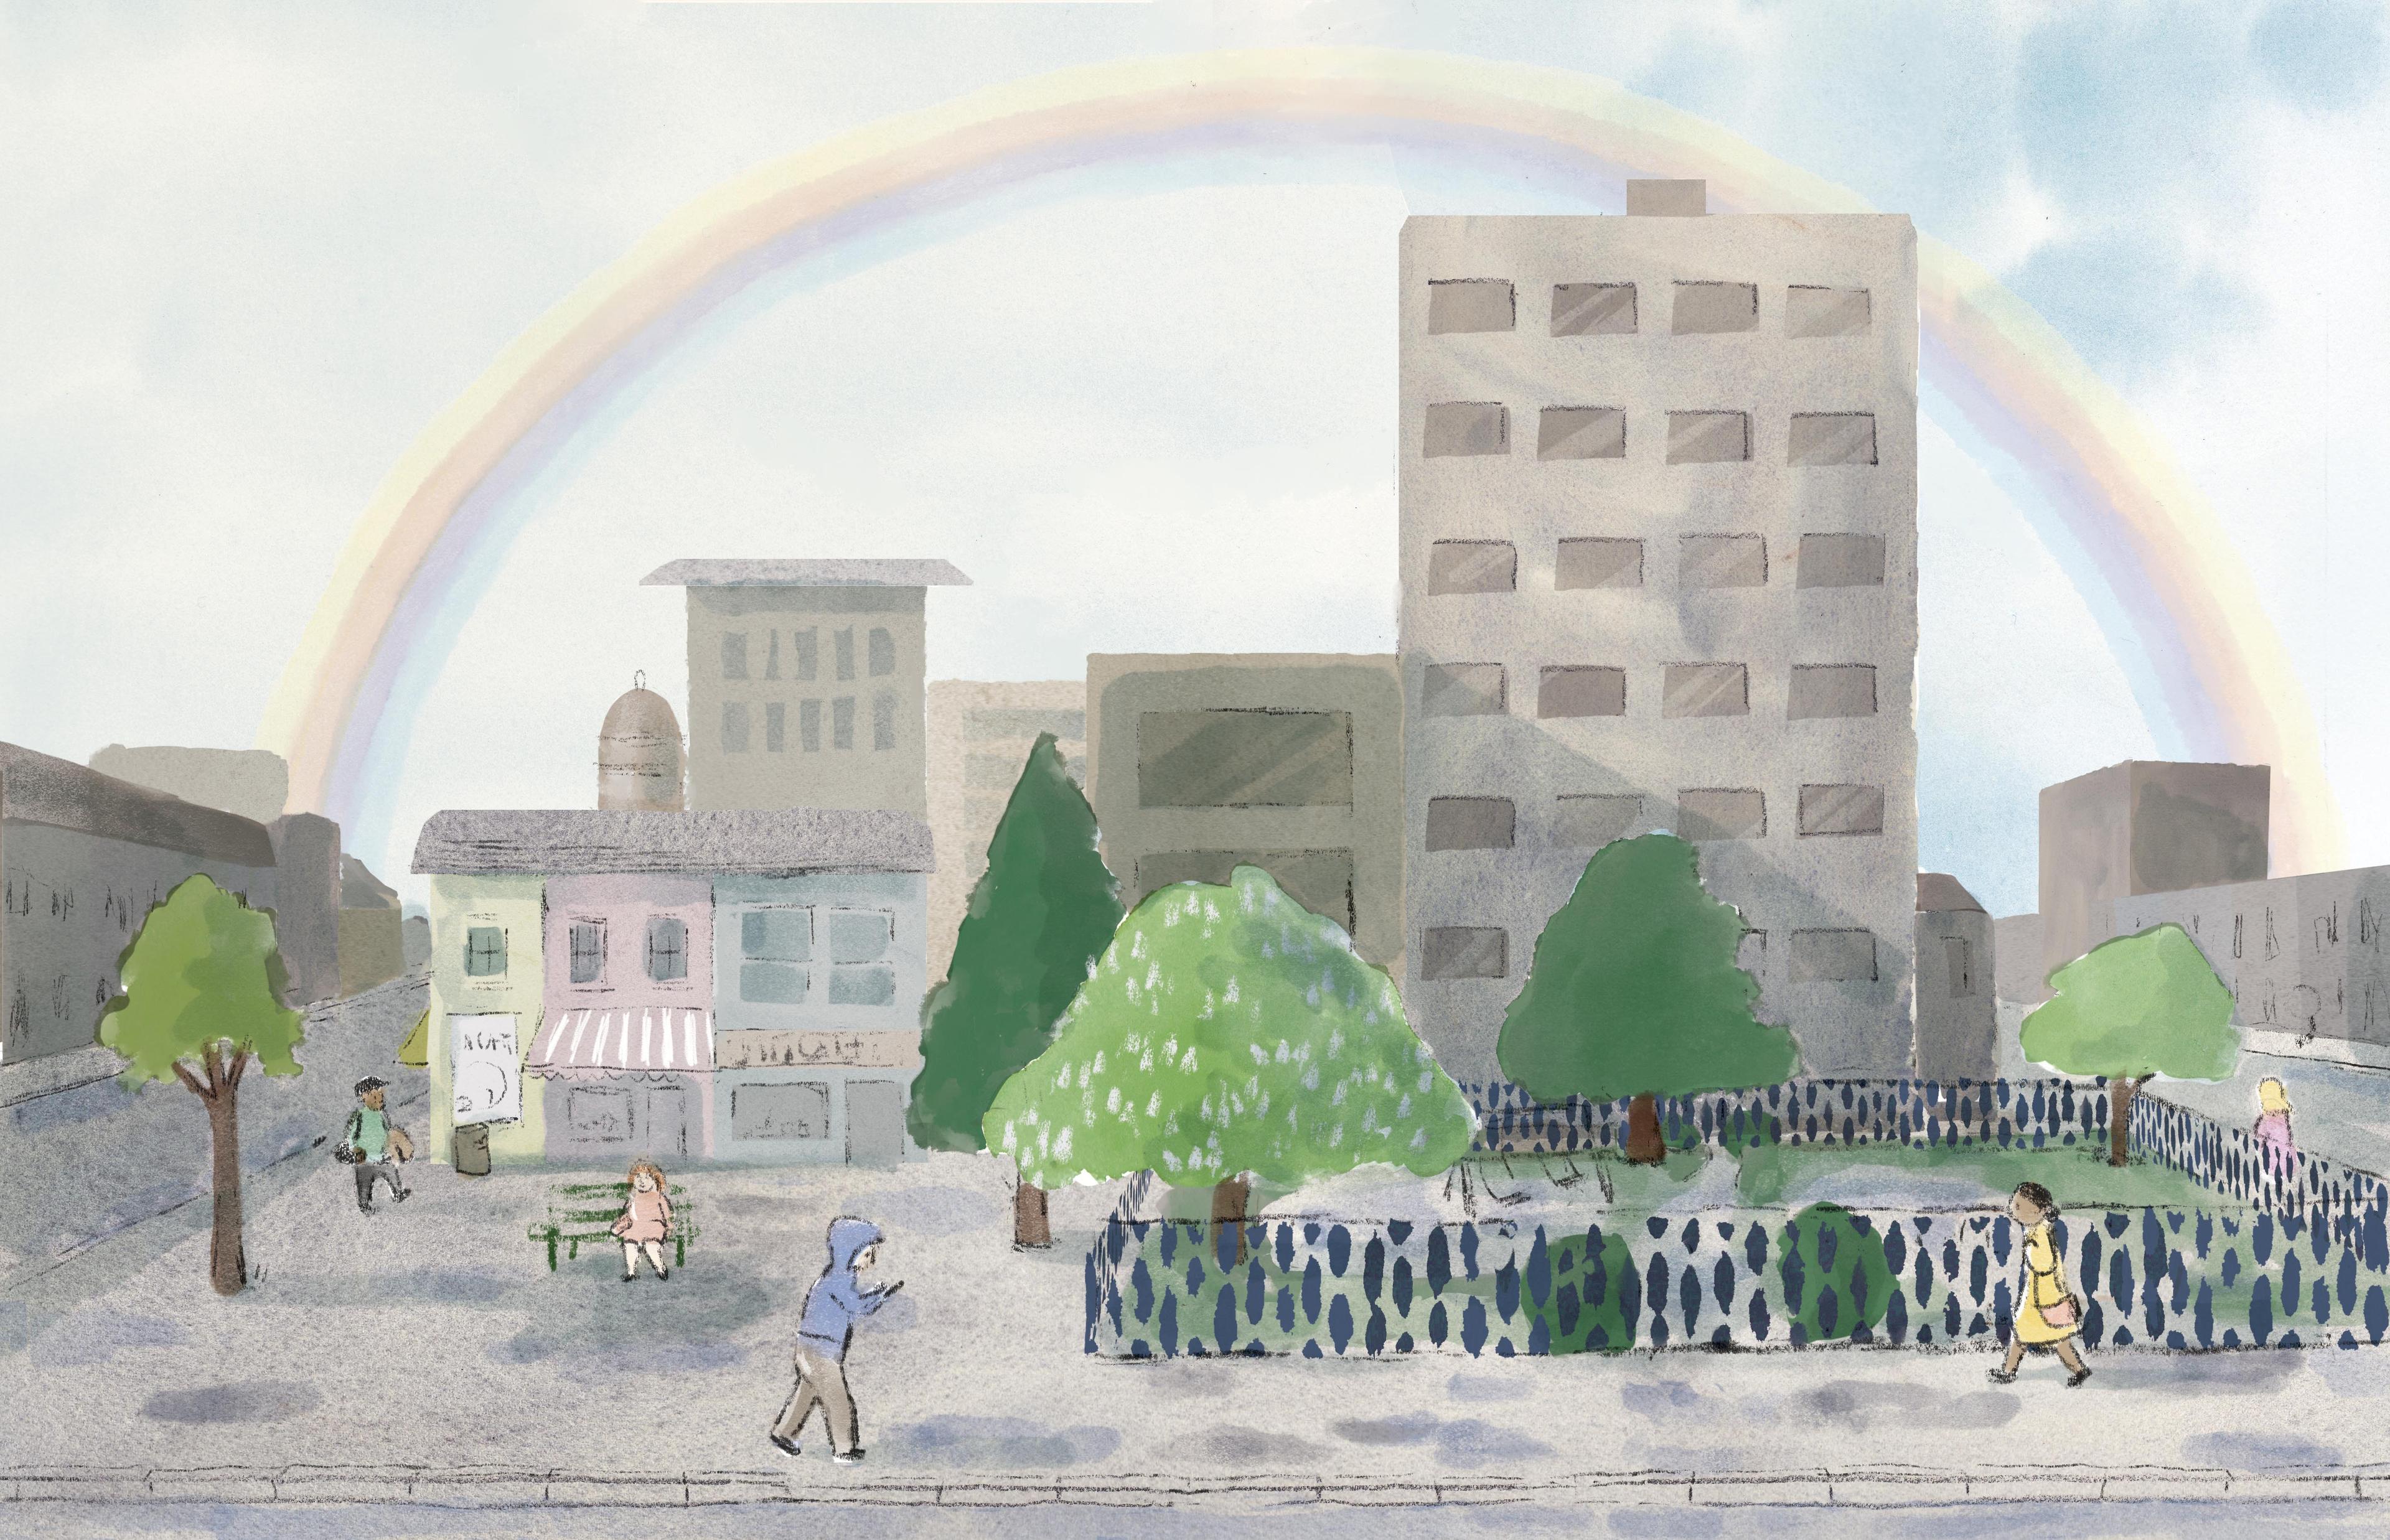 Illustration of a rainbow across a city landscape with grey buildings in the background and a small fenced park at the front. There are a few people walking around.